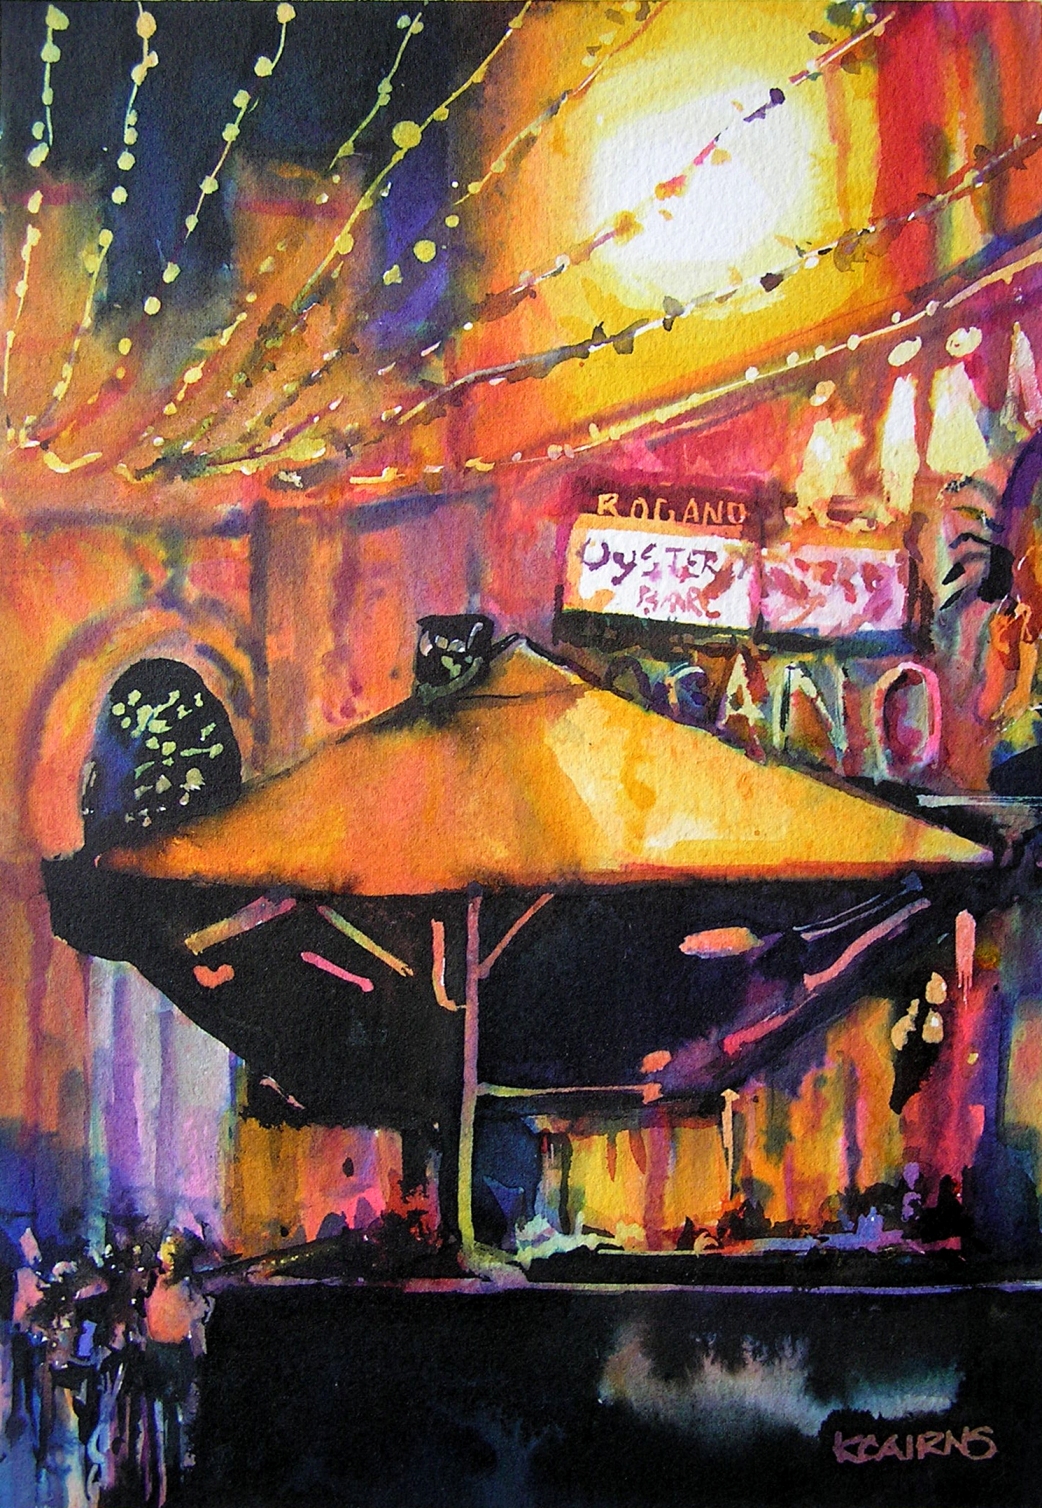 'Cocktail Hour at the Rogano ' by artist Karen Cairns